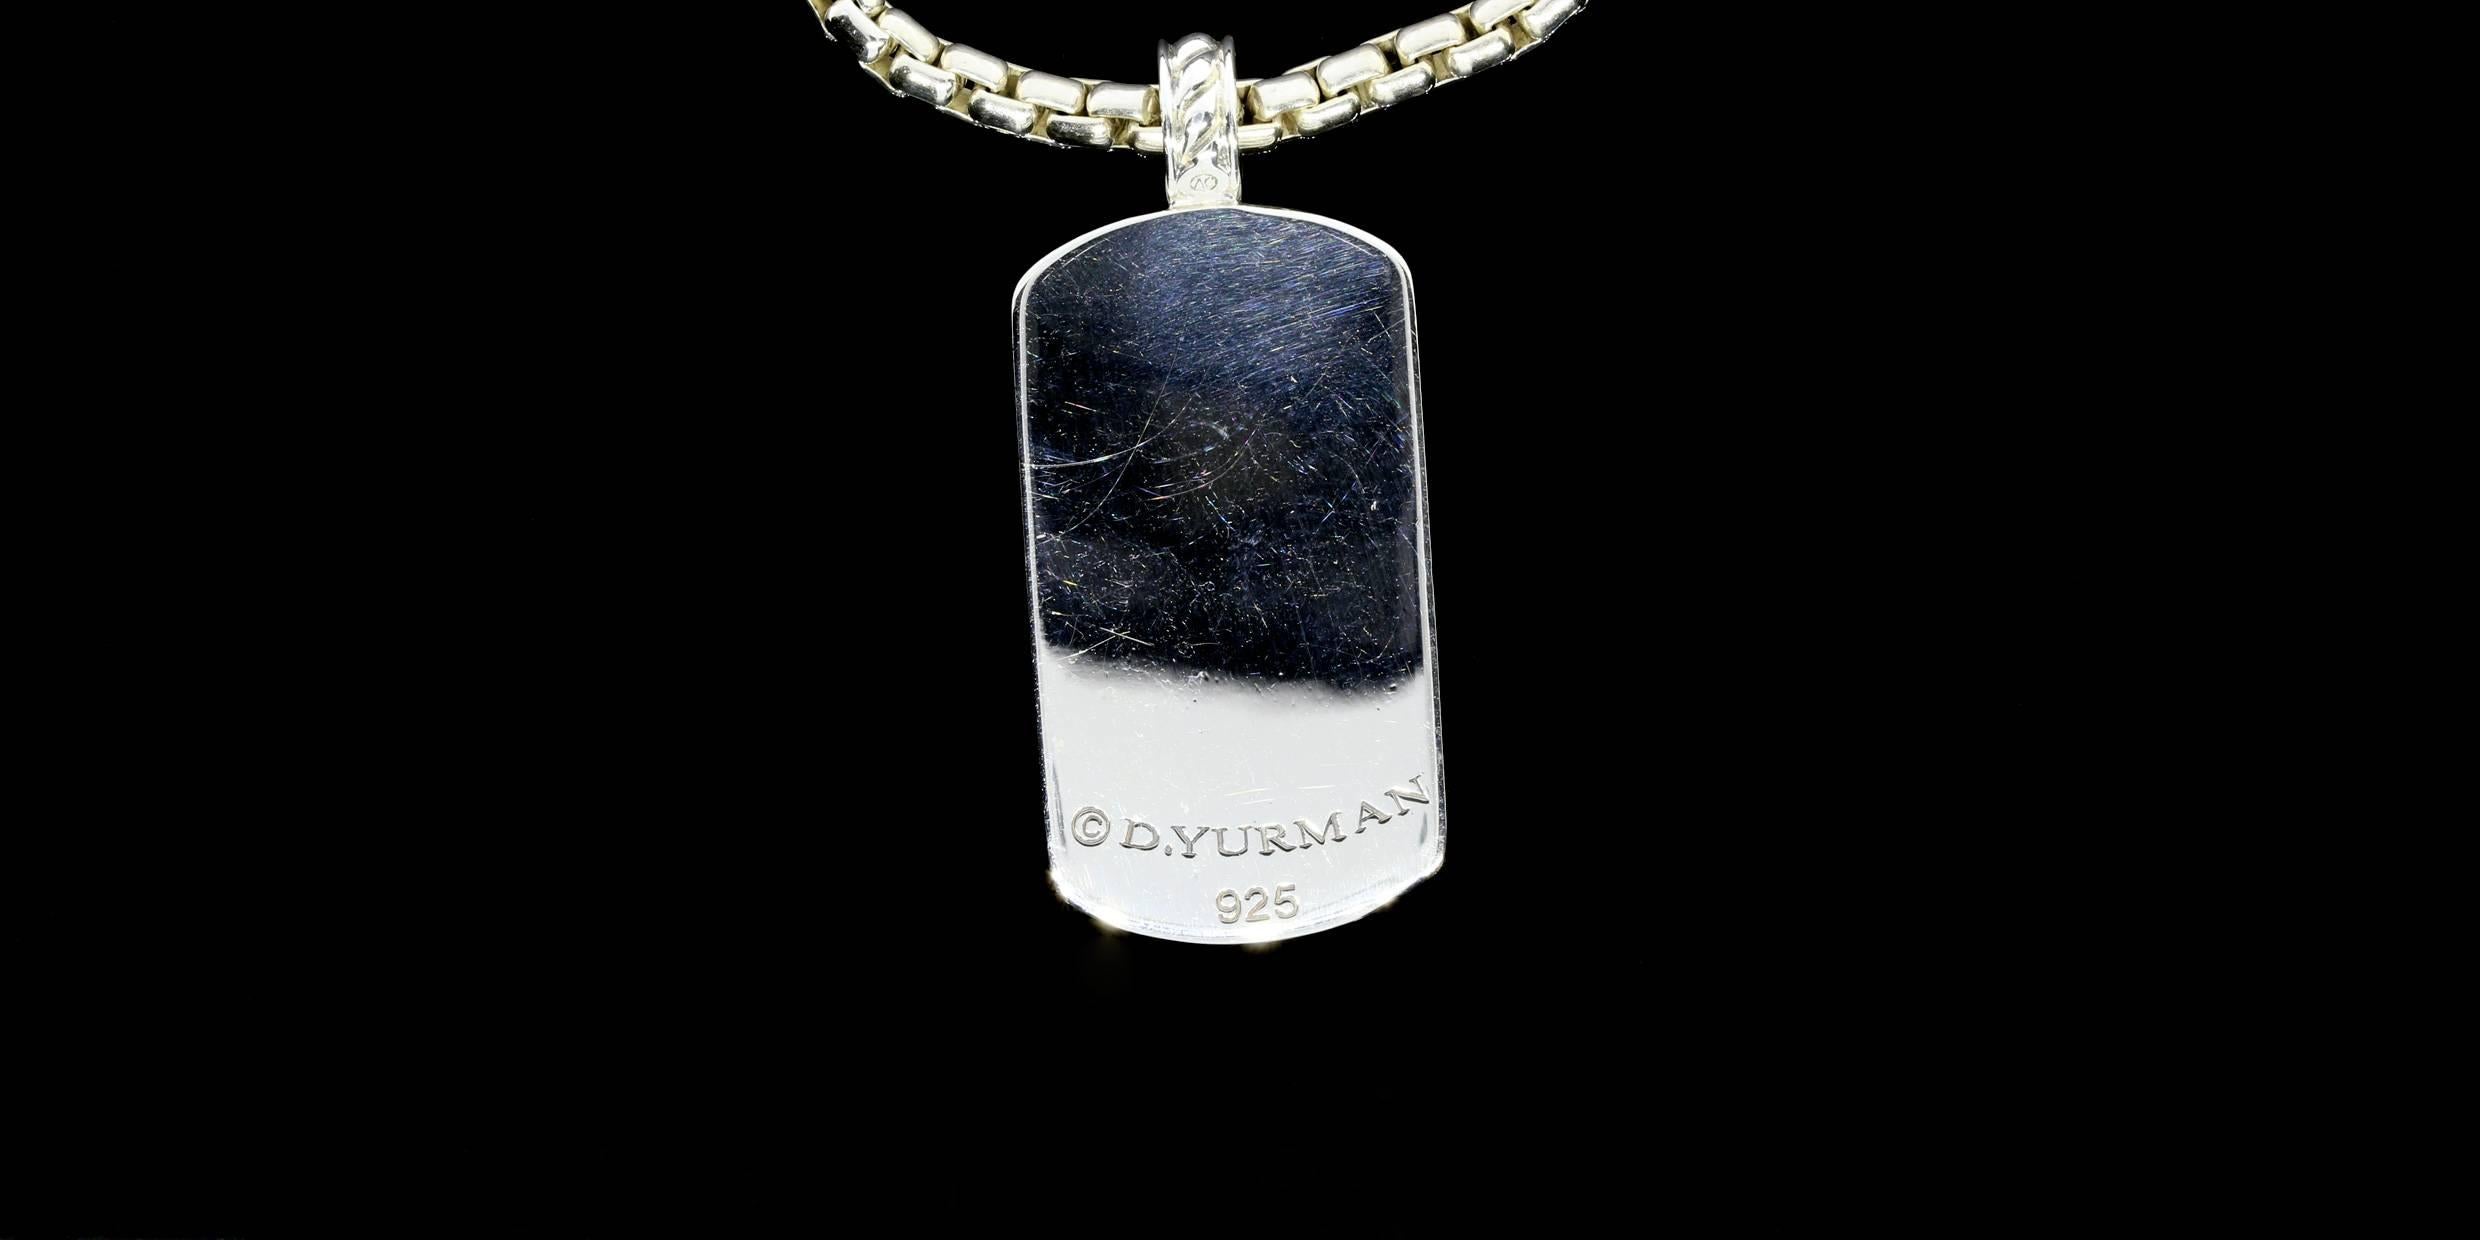 This David Yurman pendant features round brilliant cut diamonds weighing in total approximately 2.25 carats. The diamonds are I/SI1 in quality. The dog-tag is comprised of sterling silver and features a 21 inch substantial cable/box chain. The